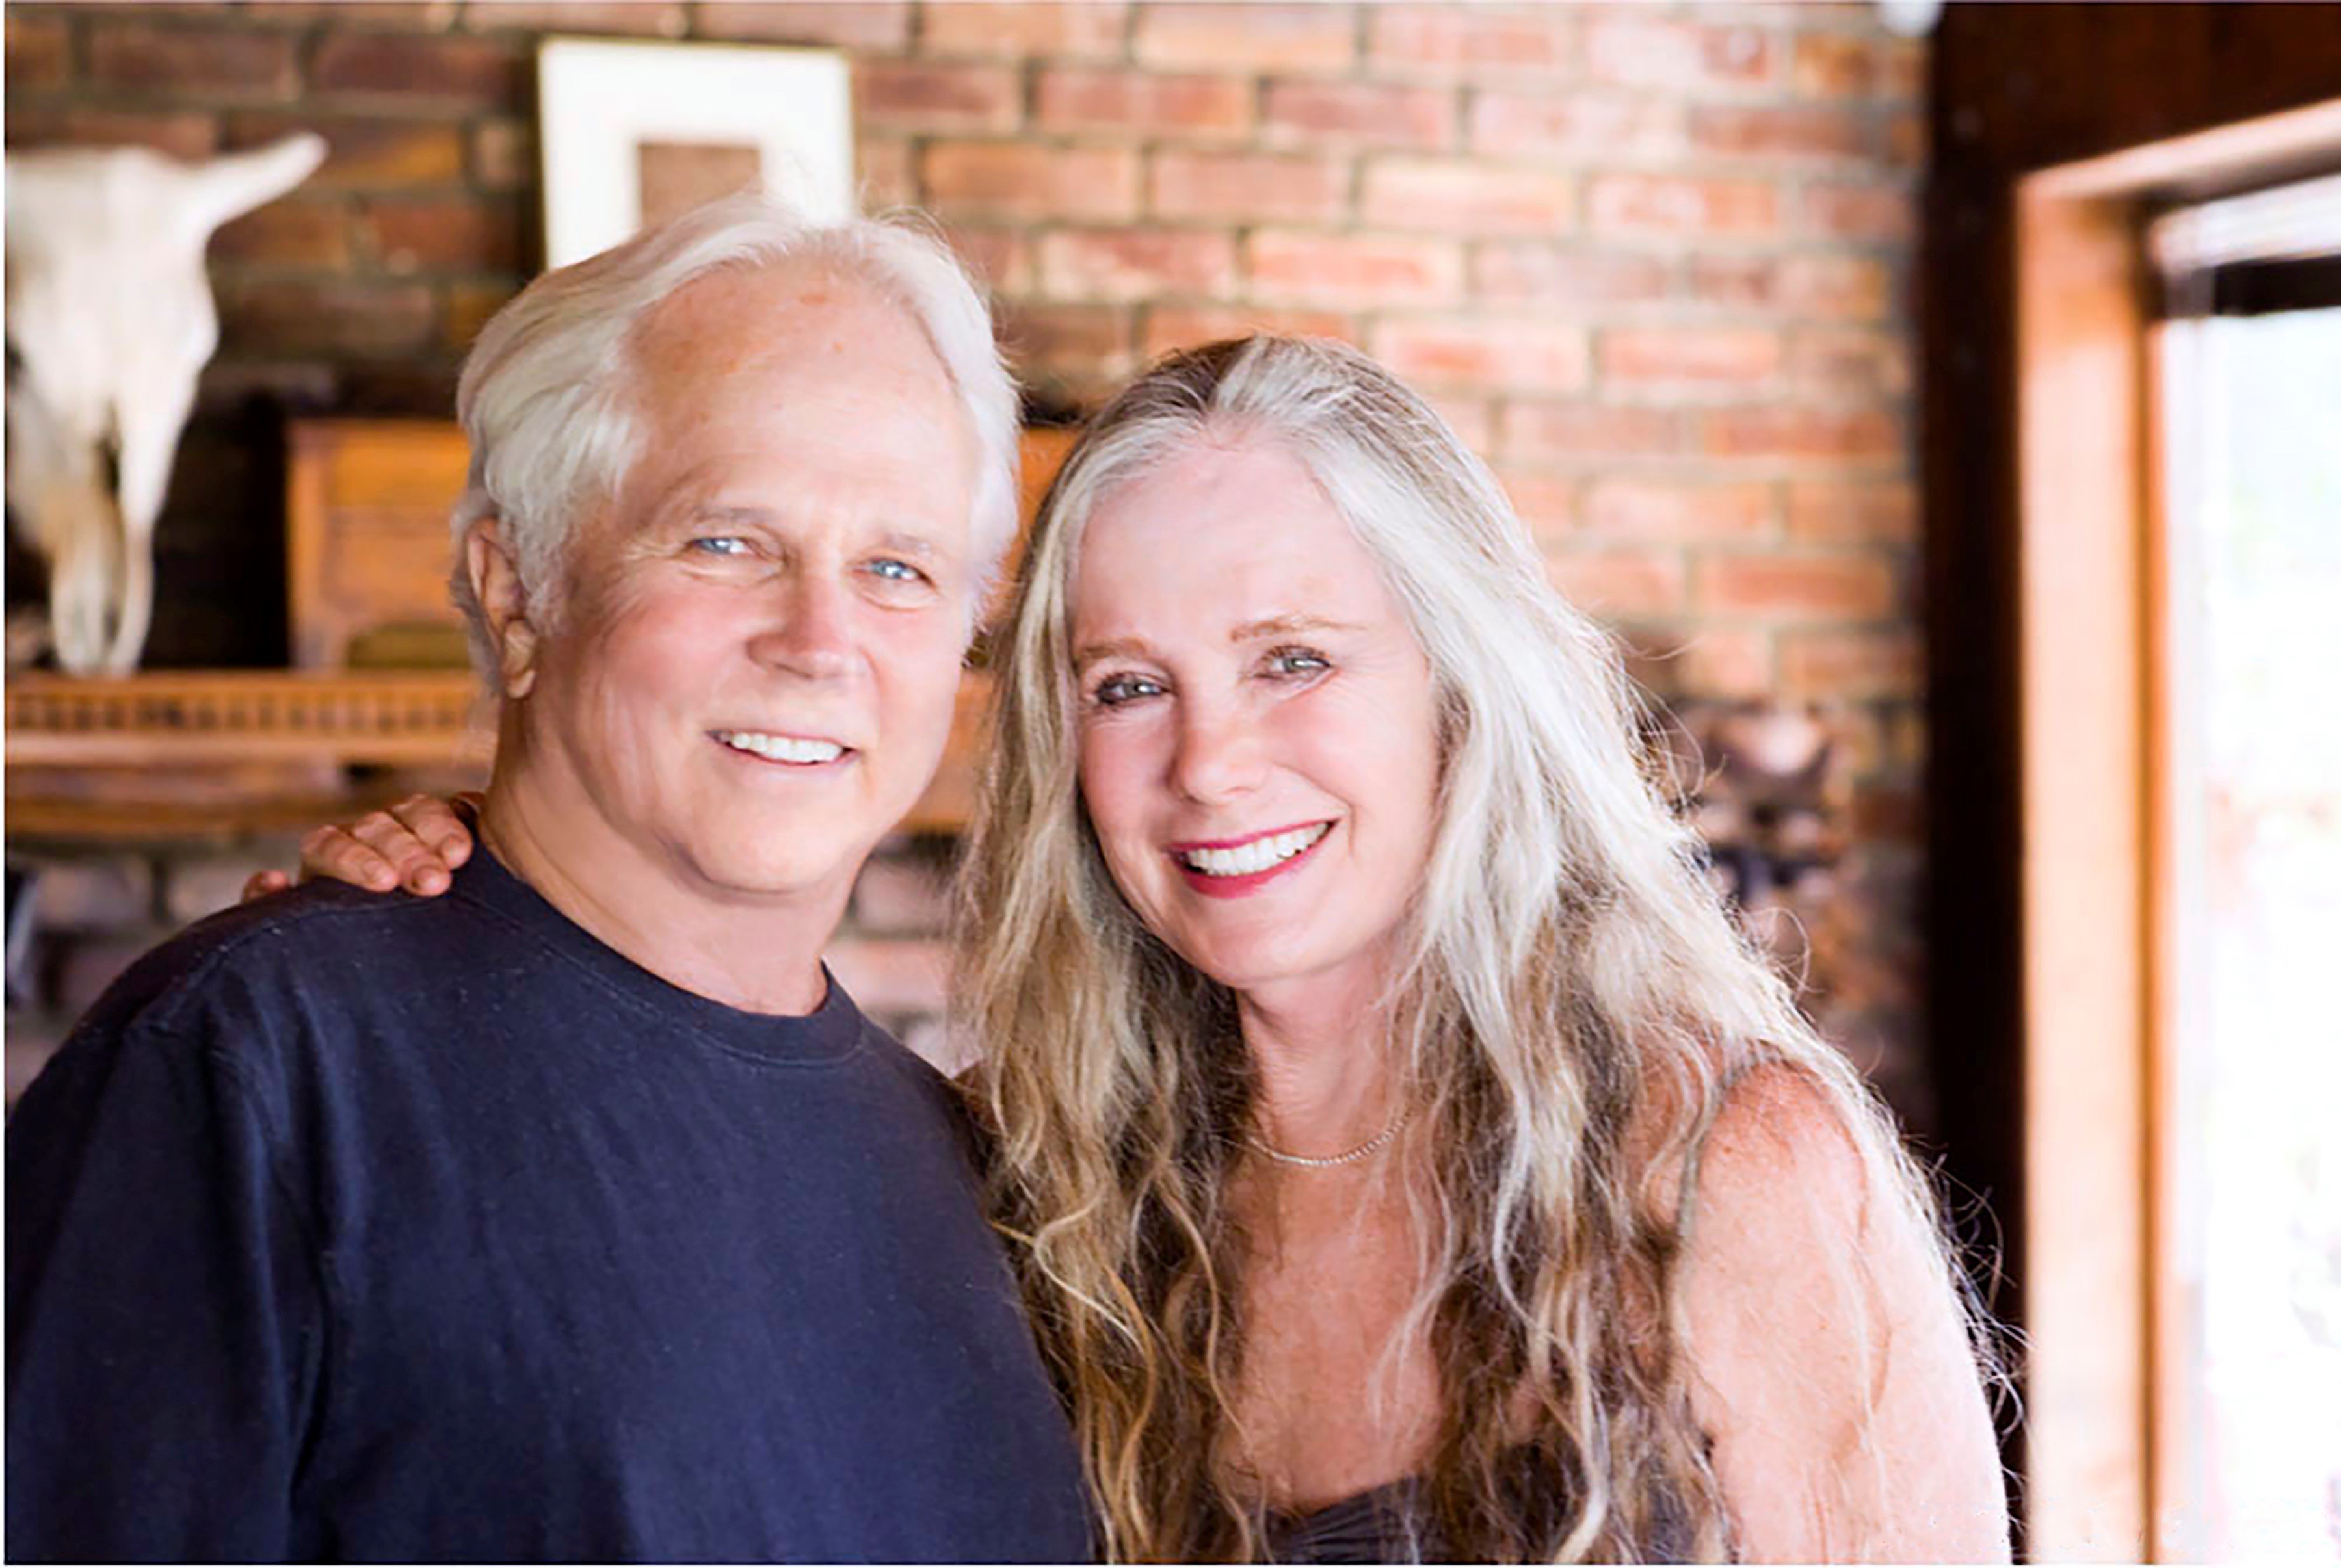 Actor and artist Tony Dow with wife Lauren Shulkind at home in Topanga, California on June 29, 2014 in Topanga, California. | Source: Getty Images